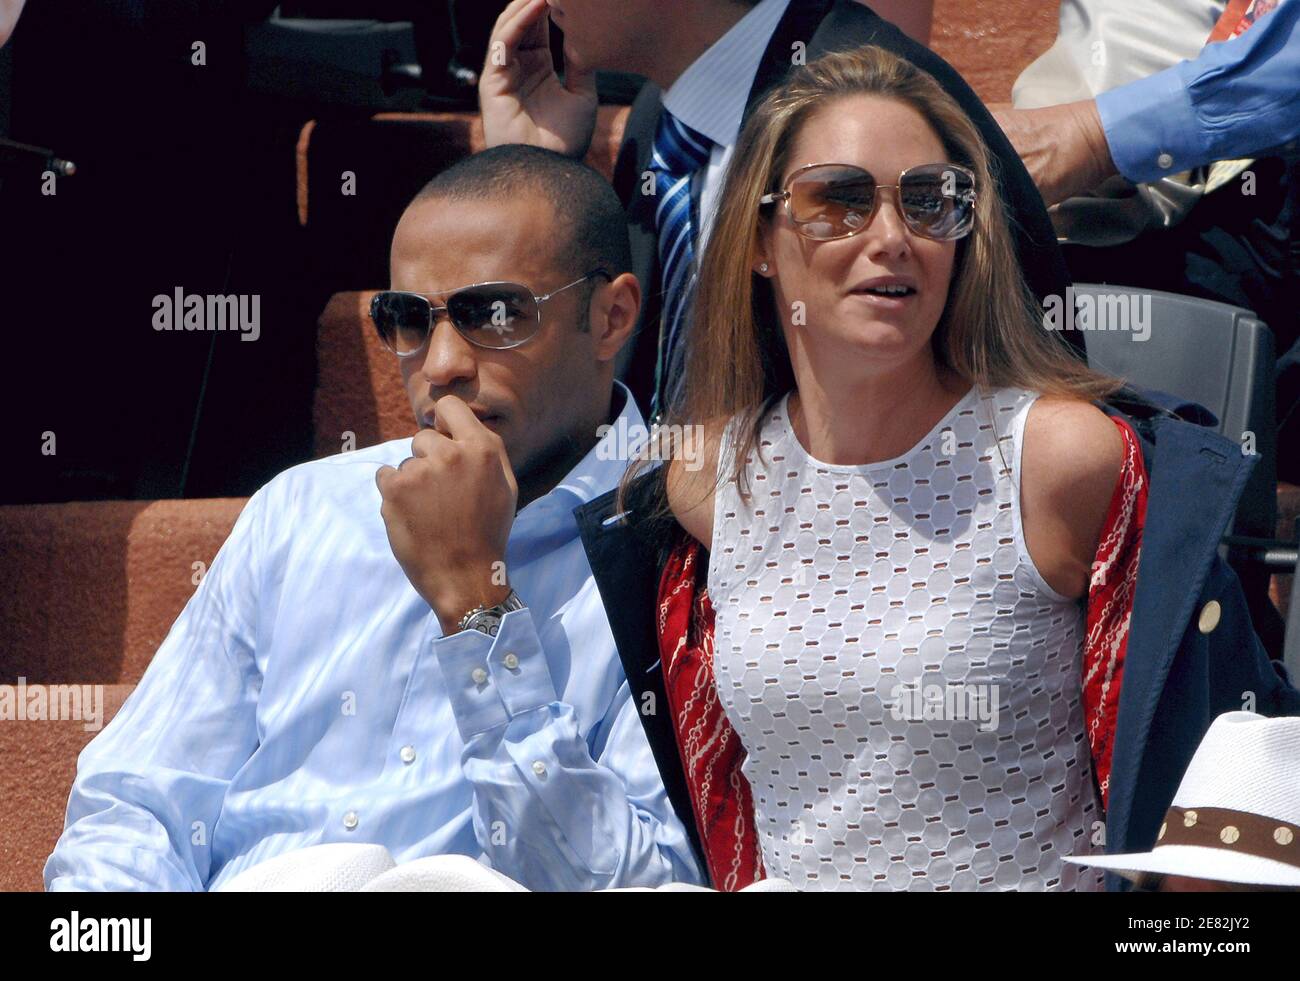 Thierry Henry pays ex-wife Claire £8m to avoid court replay